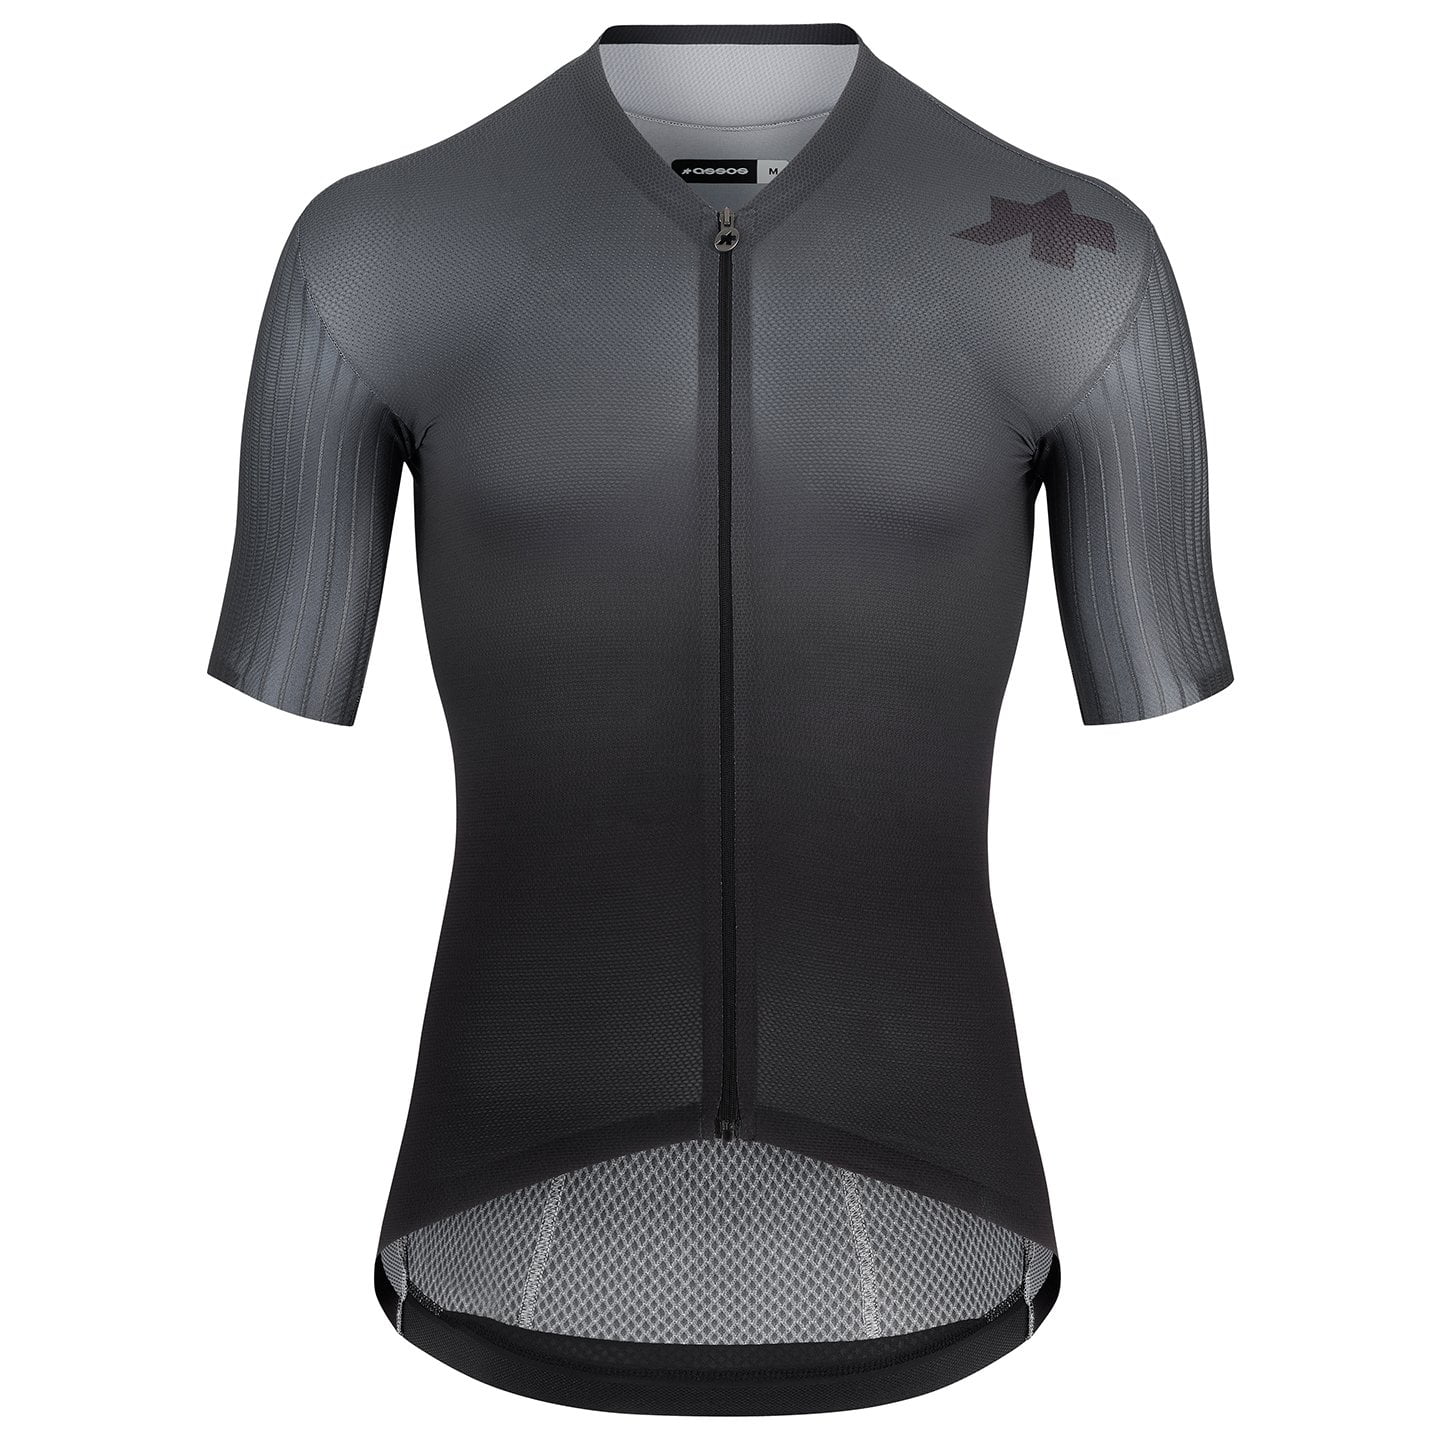 ASSOS Equipe RS S11 Short Sleeve Jersey, for men, size 2XL, Cycling jersey, Cycle clothing